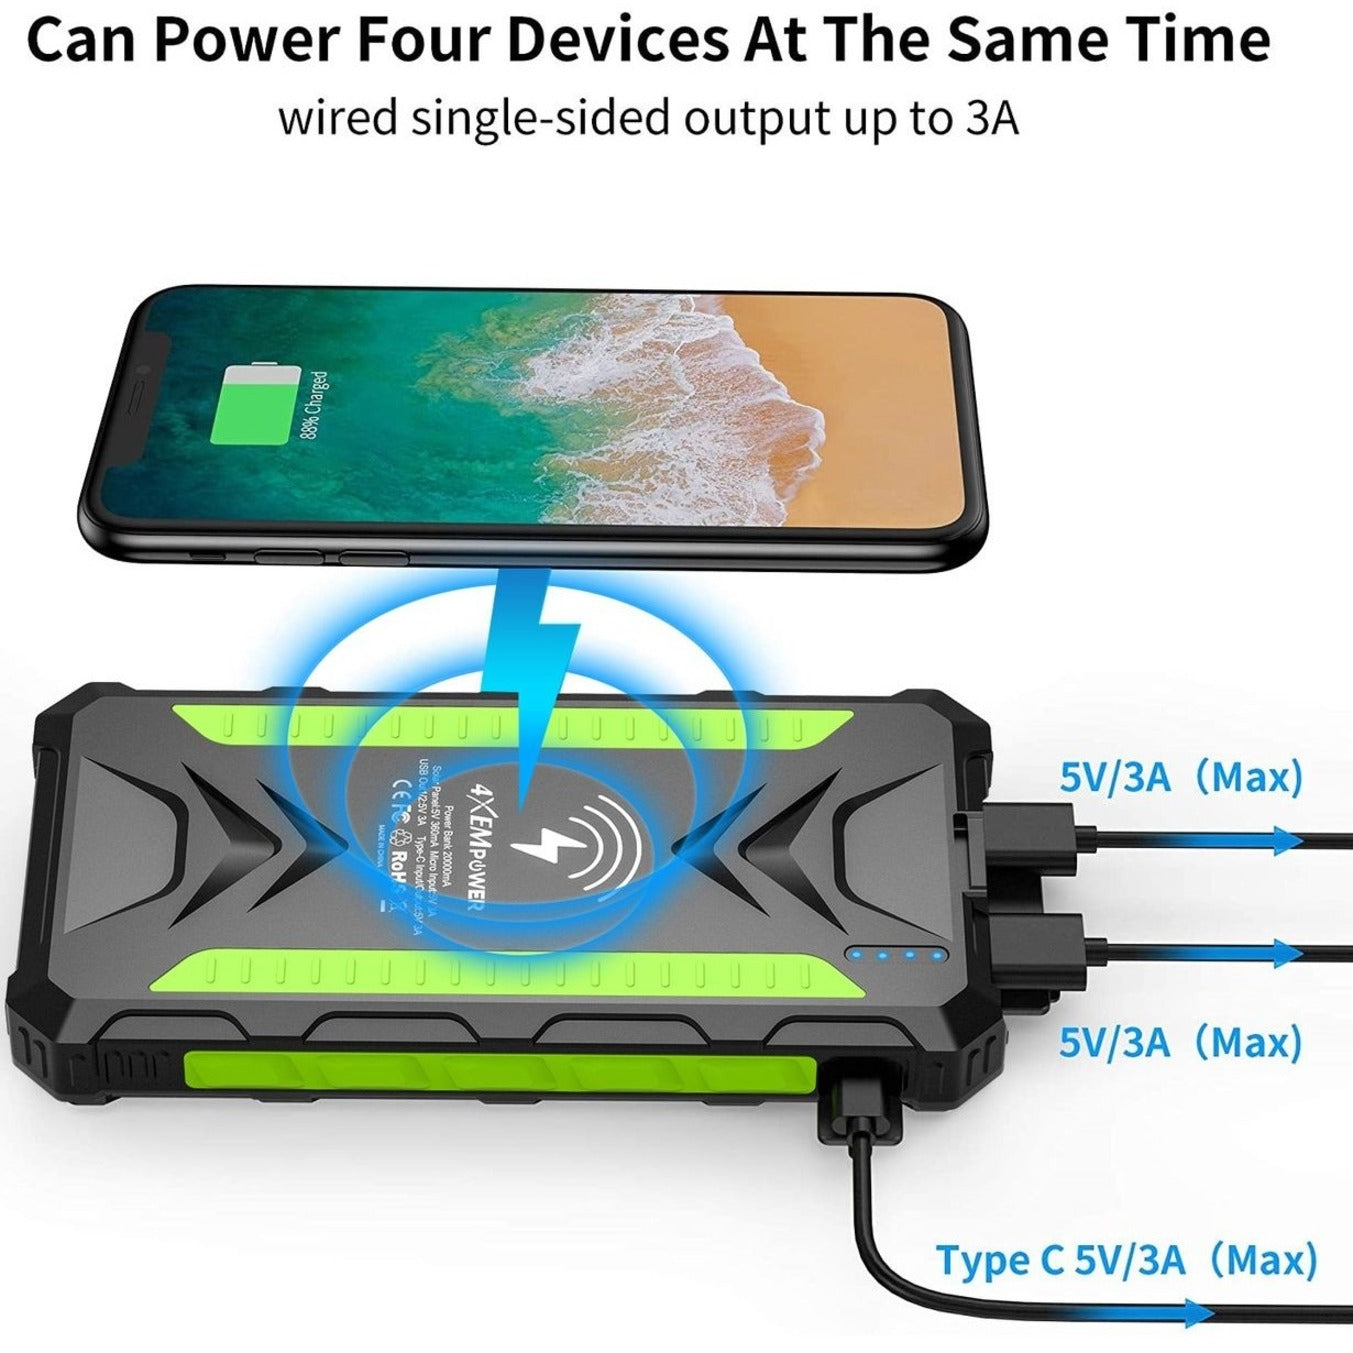 4XEM 4XSOLARPWRGN Mobile Solar Charger (Green), 20,000mAh Power Bank and USB Charger